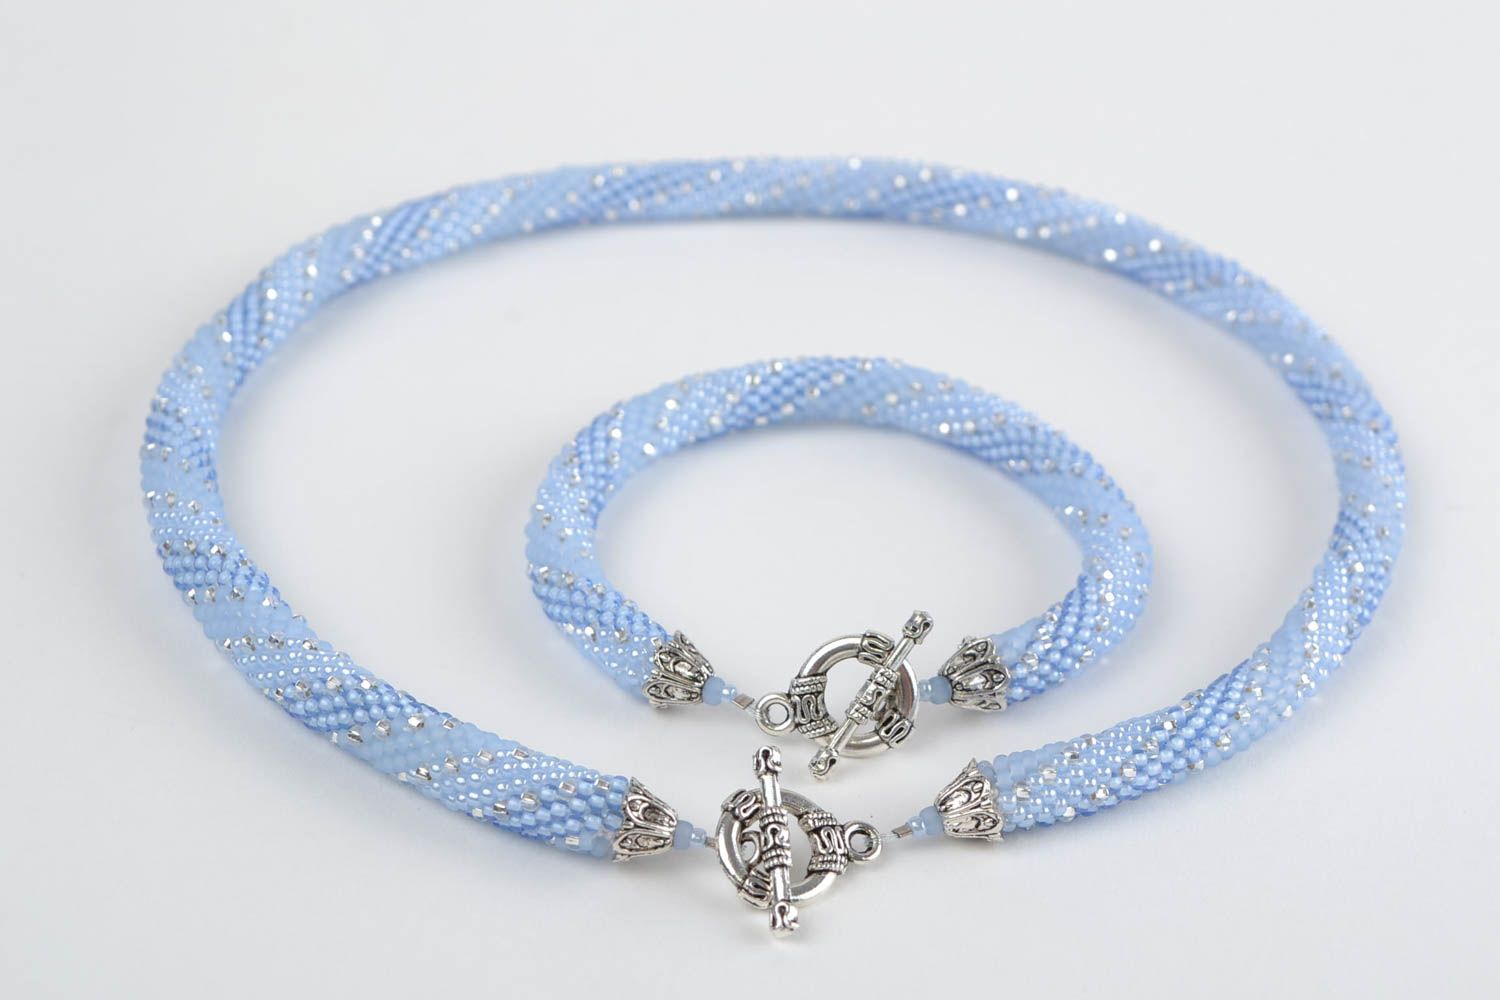 Handmade beaded cord and bracelet in blue color with metal fittings photo 5